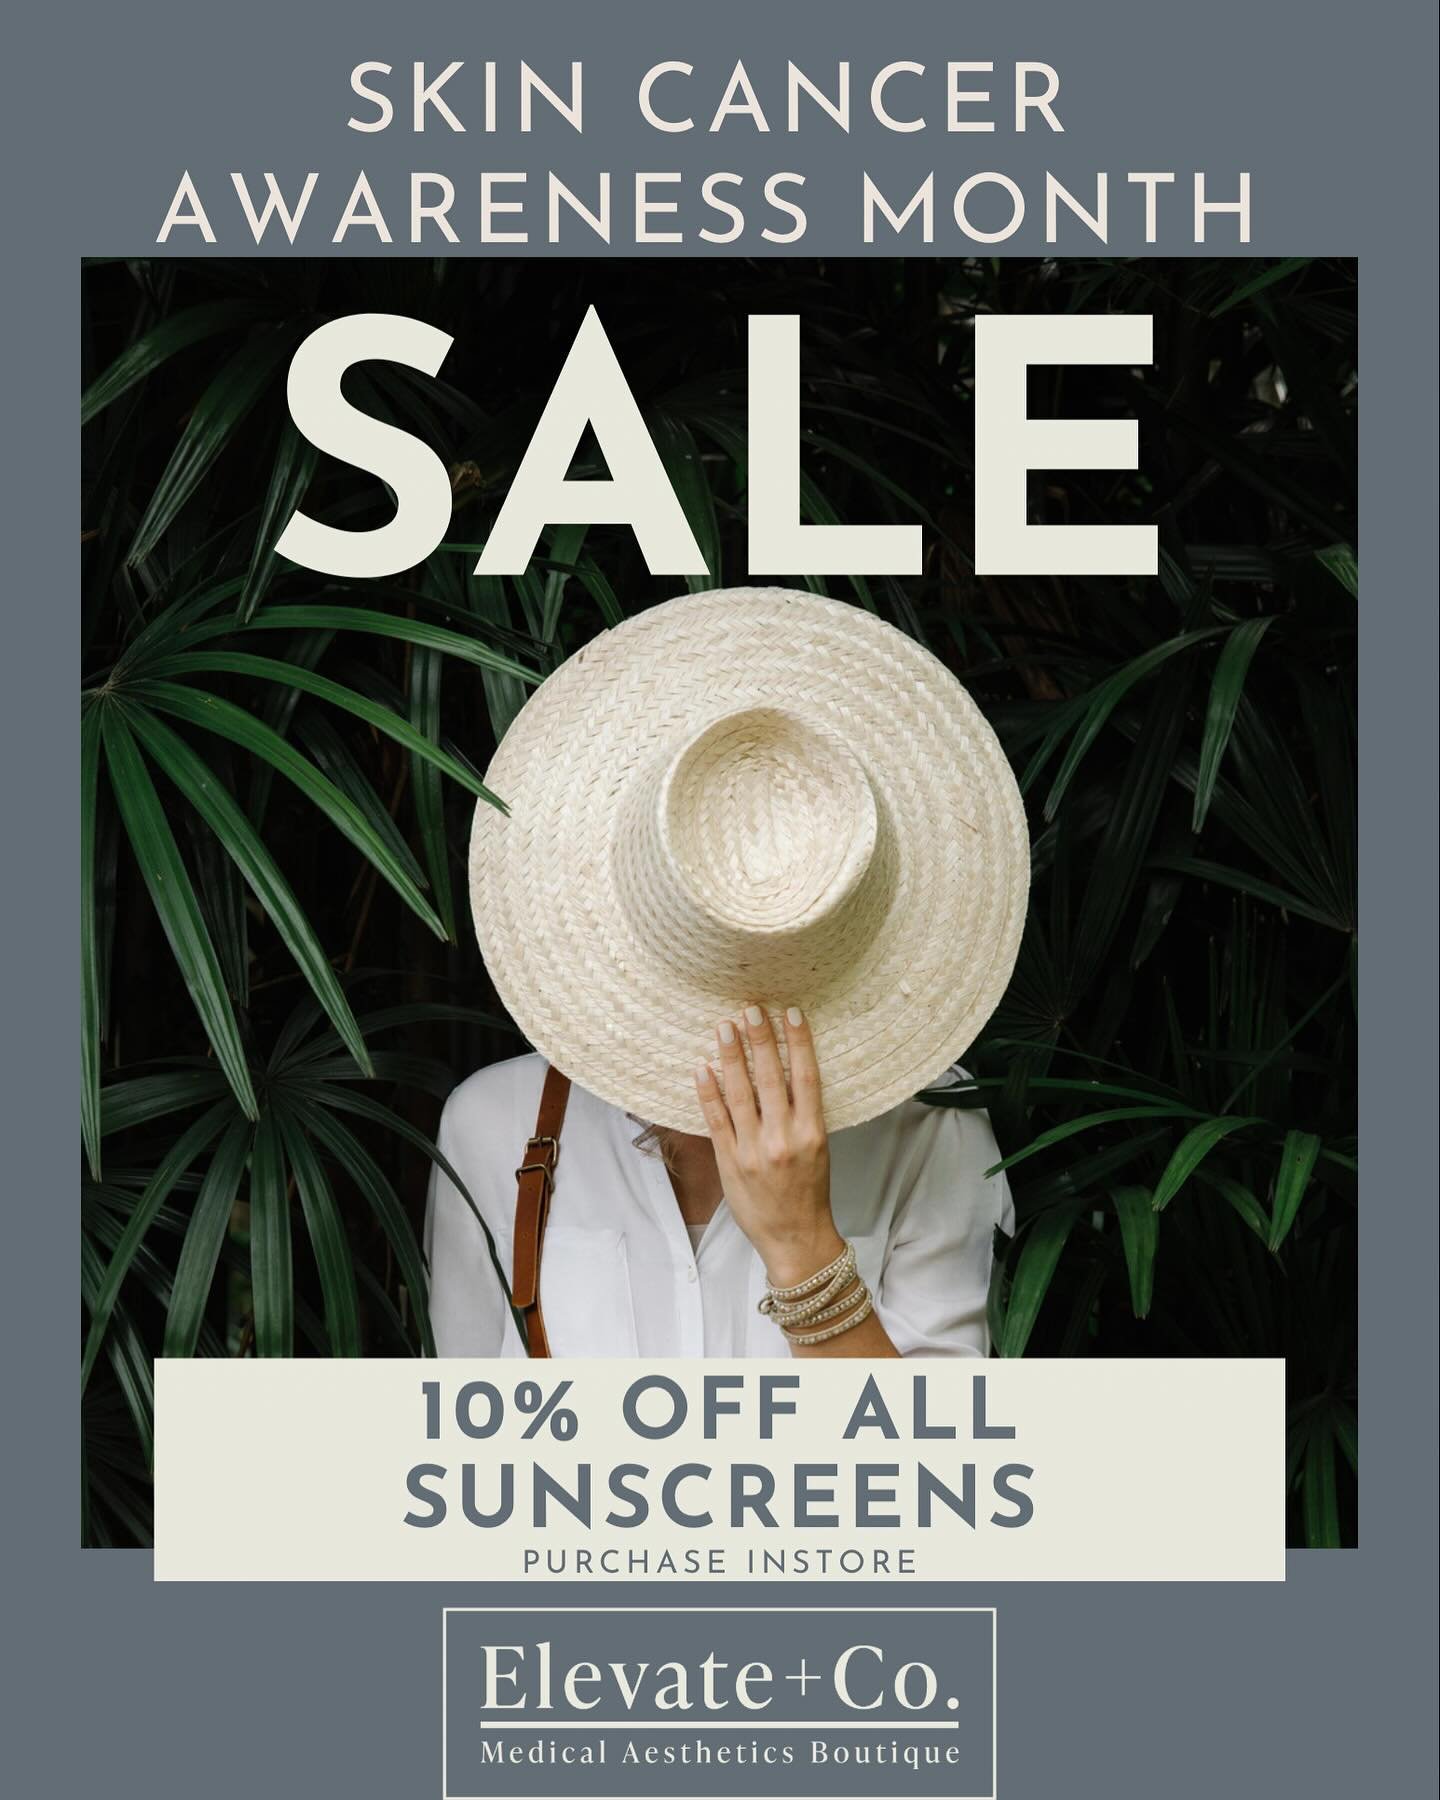 10% off all sunscreens for skin cancer awareness month. ☀️

Protect your investment and your skin! 

In store purchases from 5/1/24 to 5/31/24. 

&bull;&bull;&bull;&bull;&bull;&bull;&bull;&bull;&bull;&bull;
Elevate + Co. 
BOOK HERE 
💻elevateandcomke